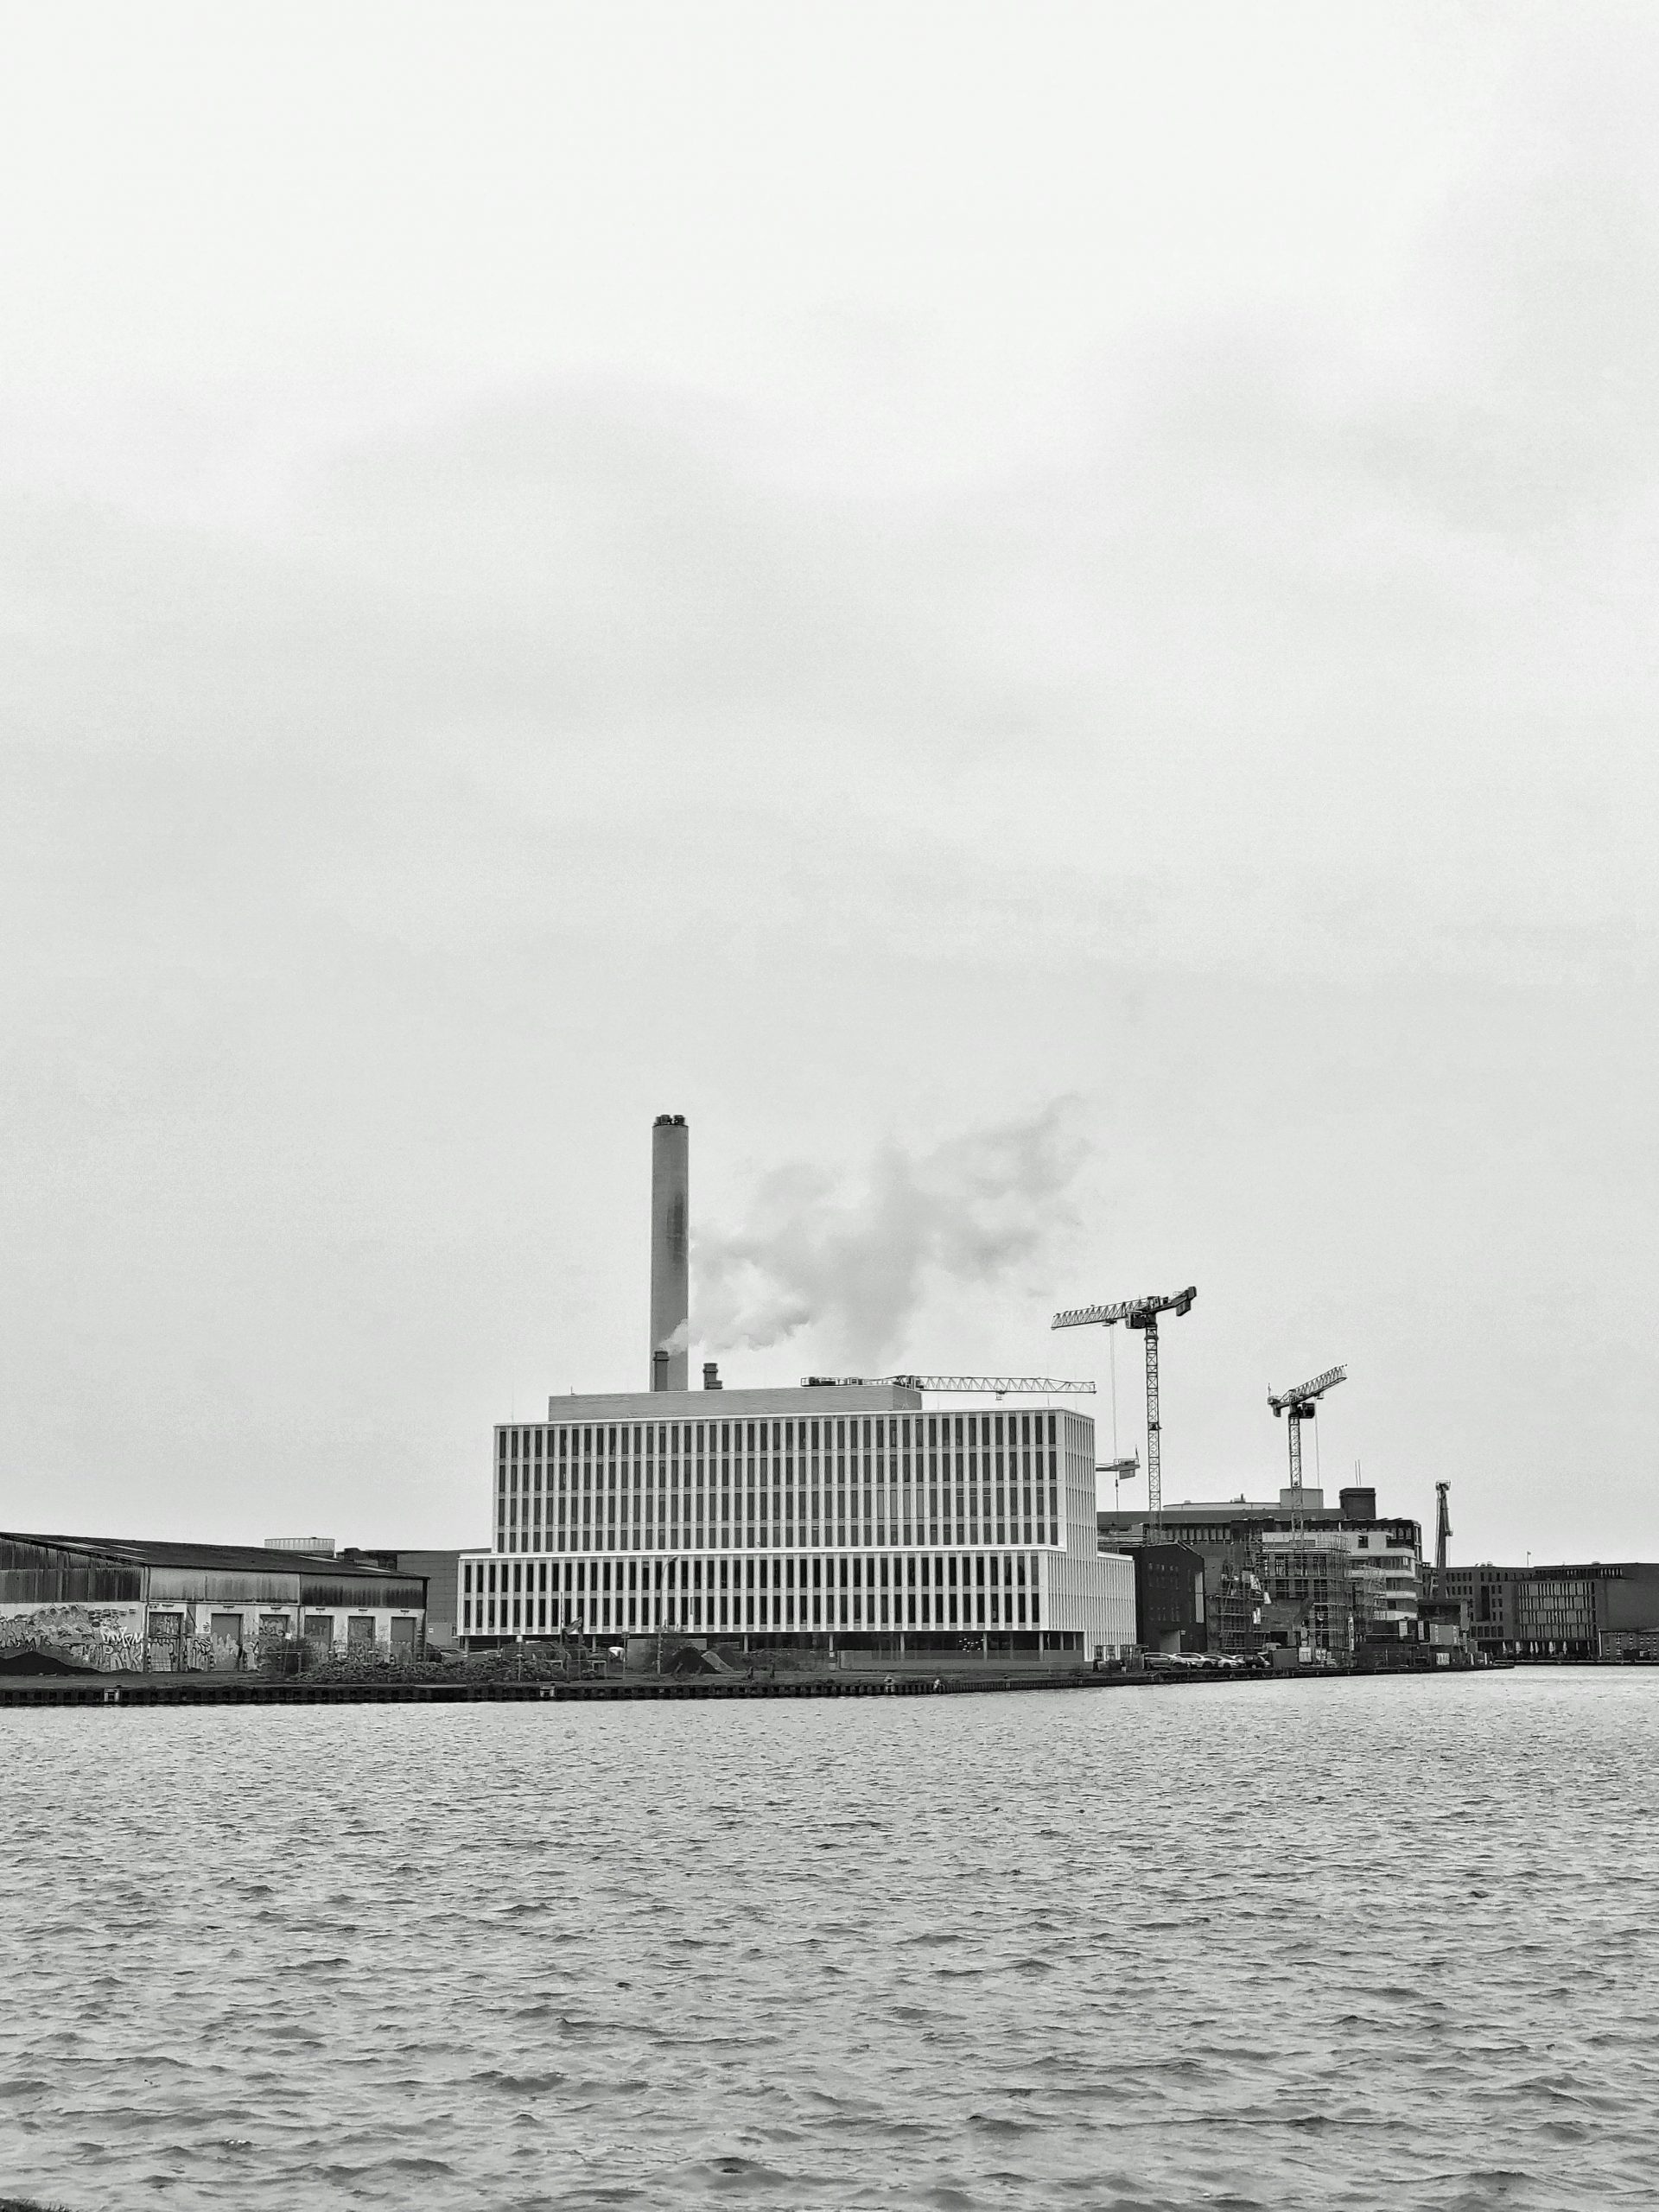 Factory in front of a large body of water.